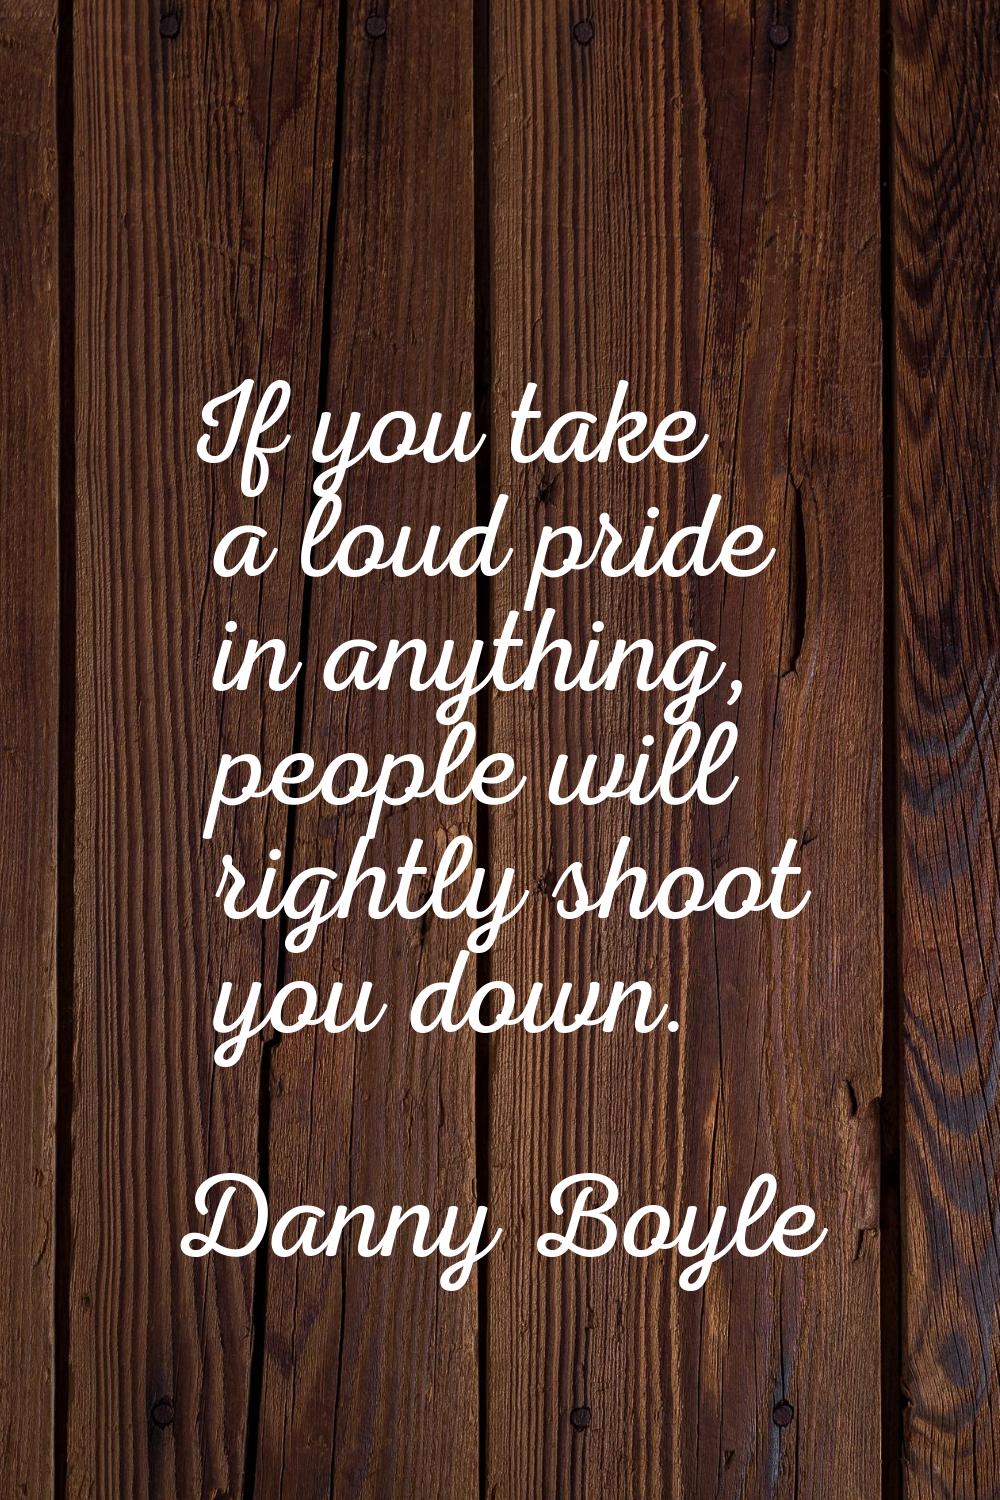 If you take a loud pride in anything, people will rightly shoot you down.